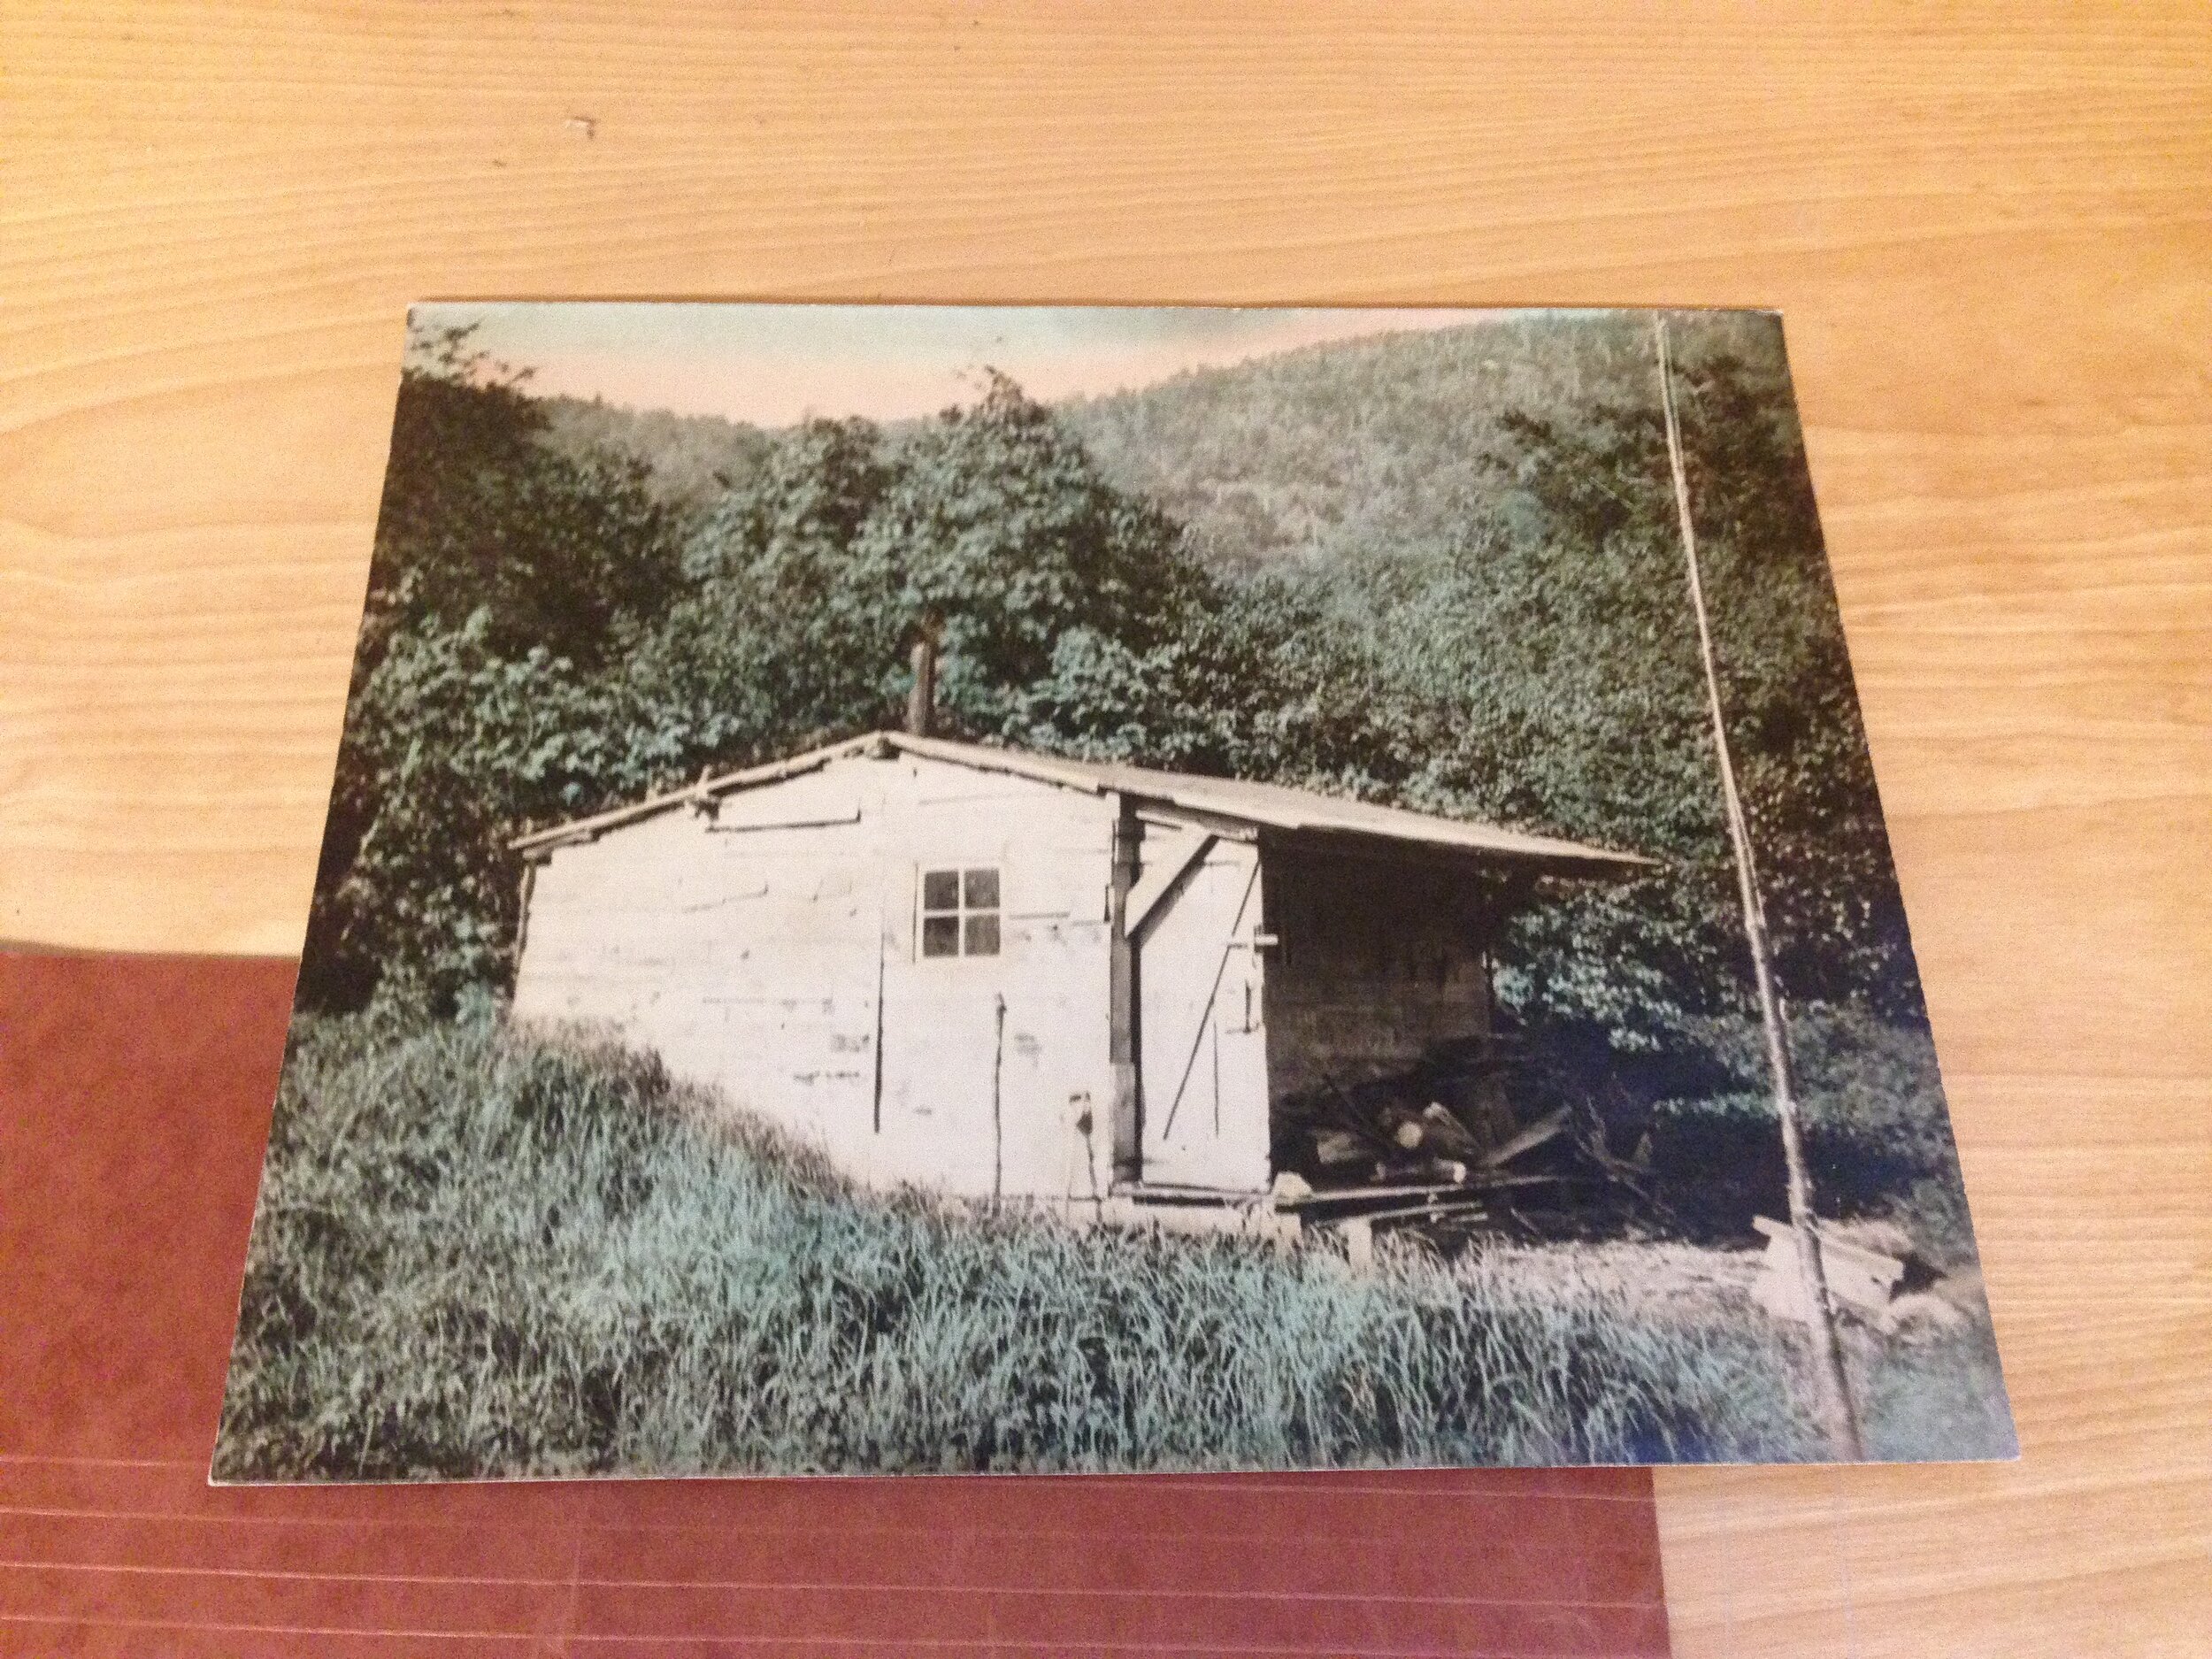   Photographic print of a shelter on the Long Trail (Green Mountain Club Archives).  